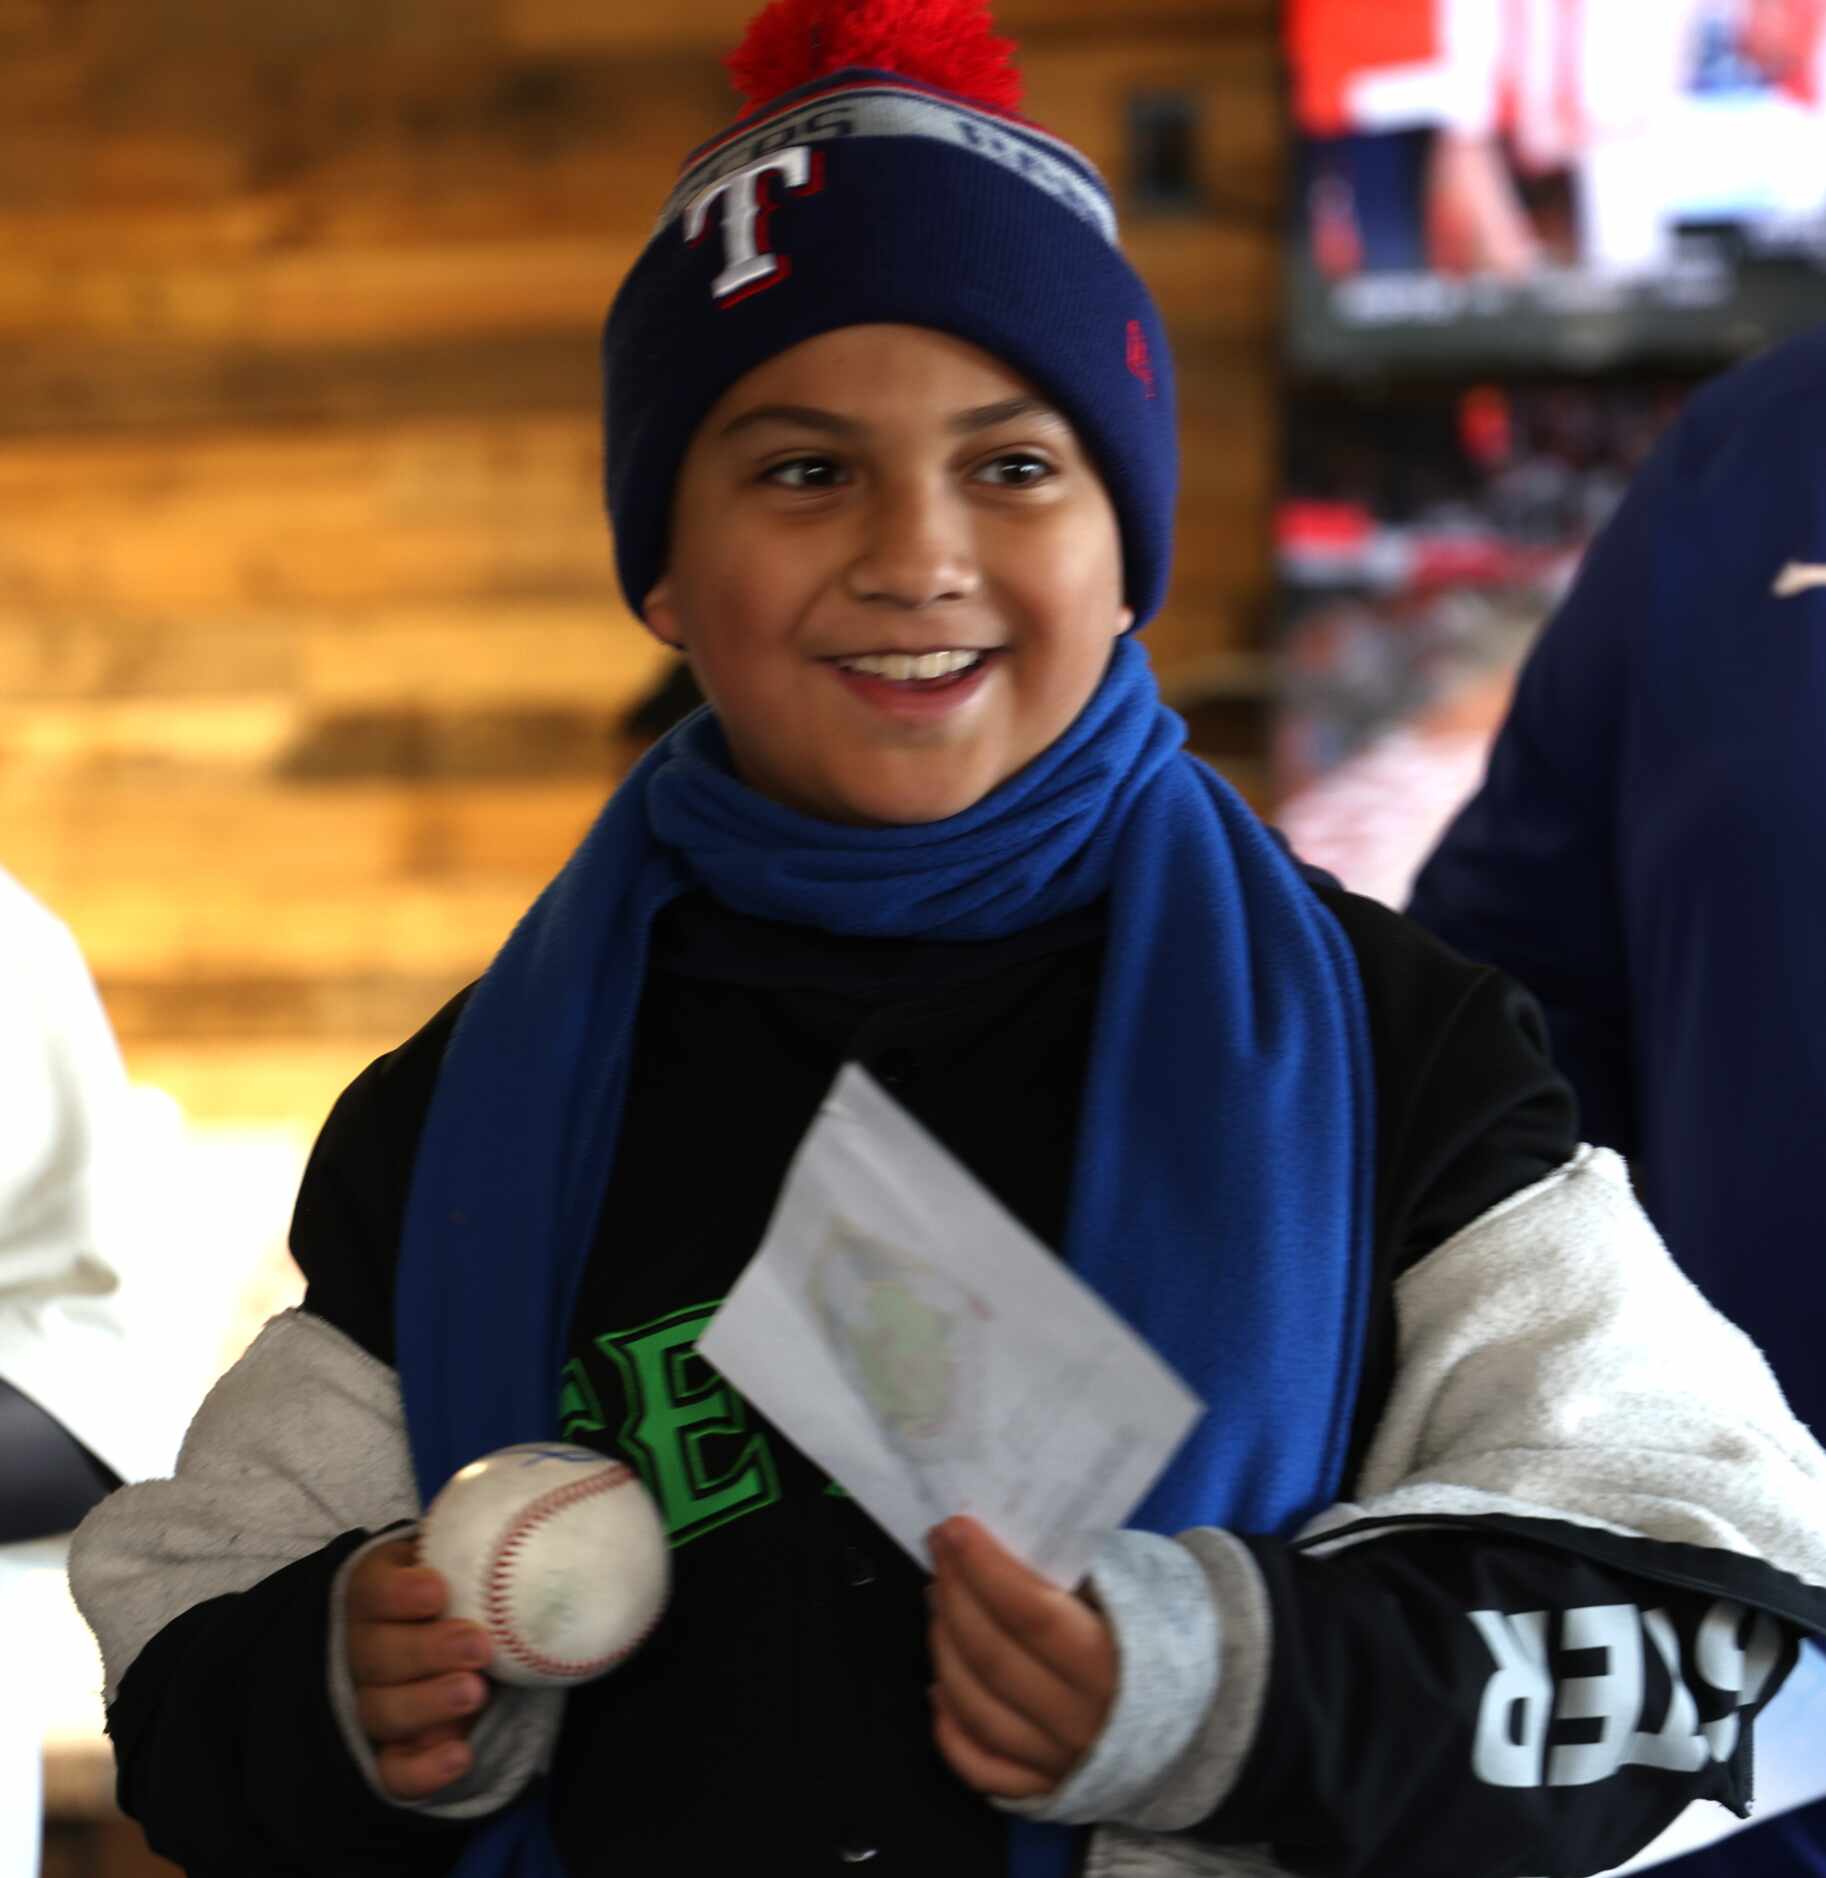 Texas Rangers fan Pablo Sosa, 9, smiles after receiving an autograph on his baseball from...